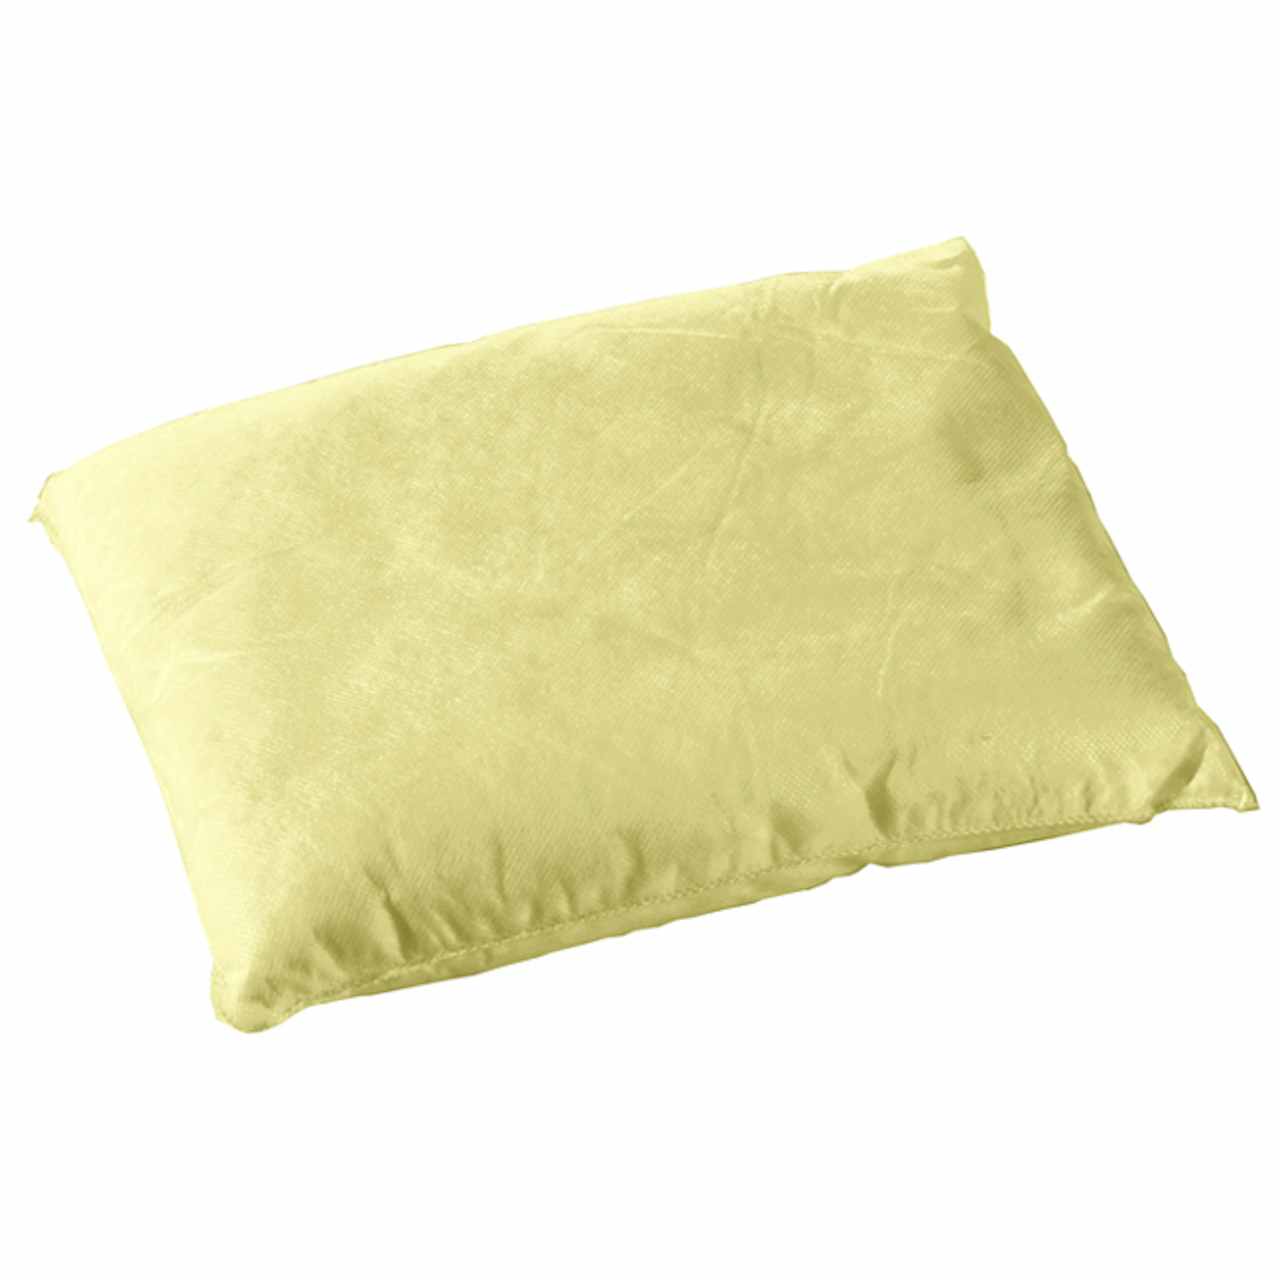 Spilkleen Chemical Cushions